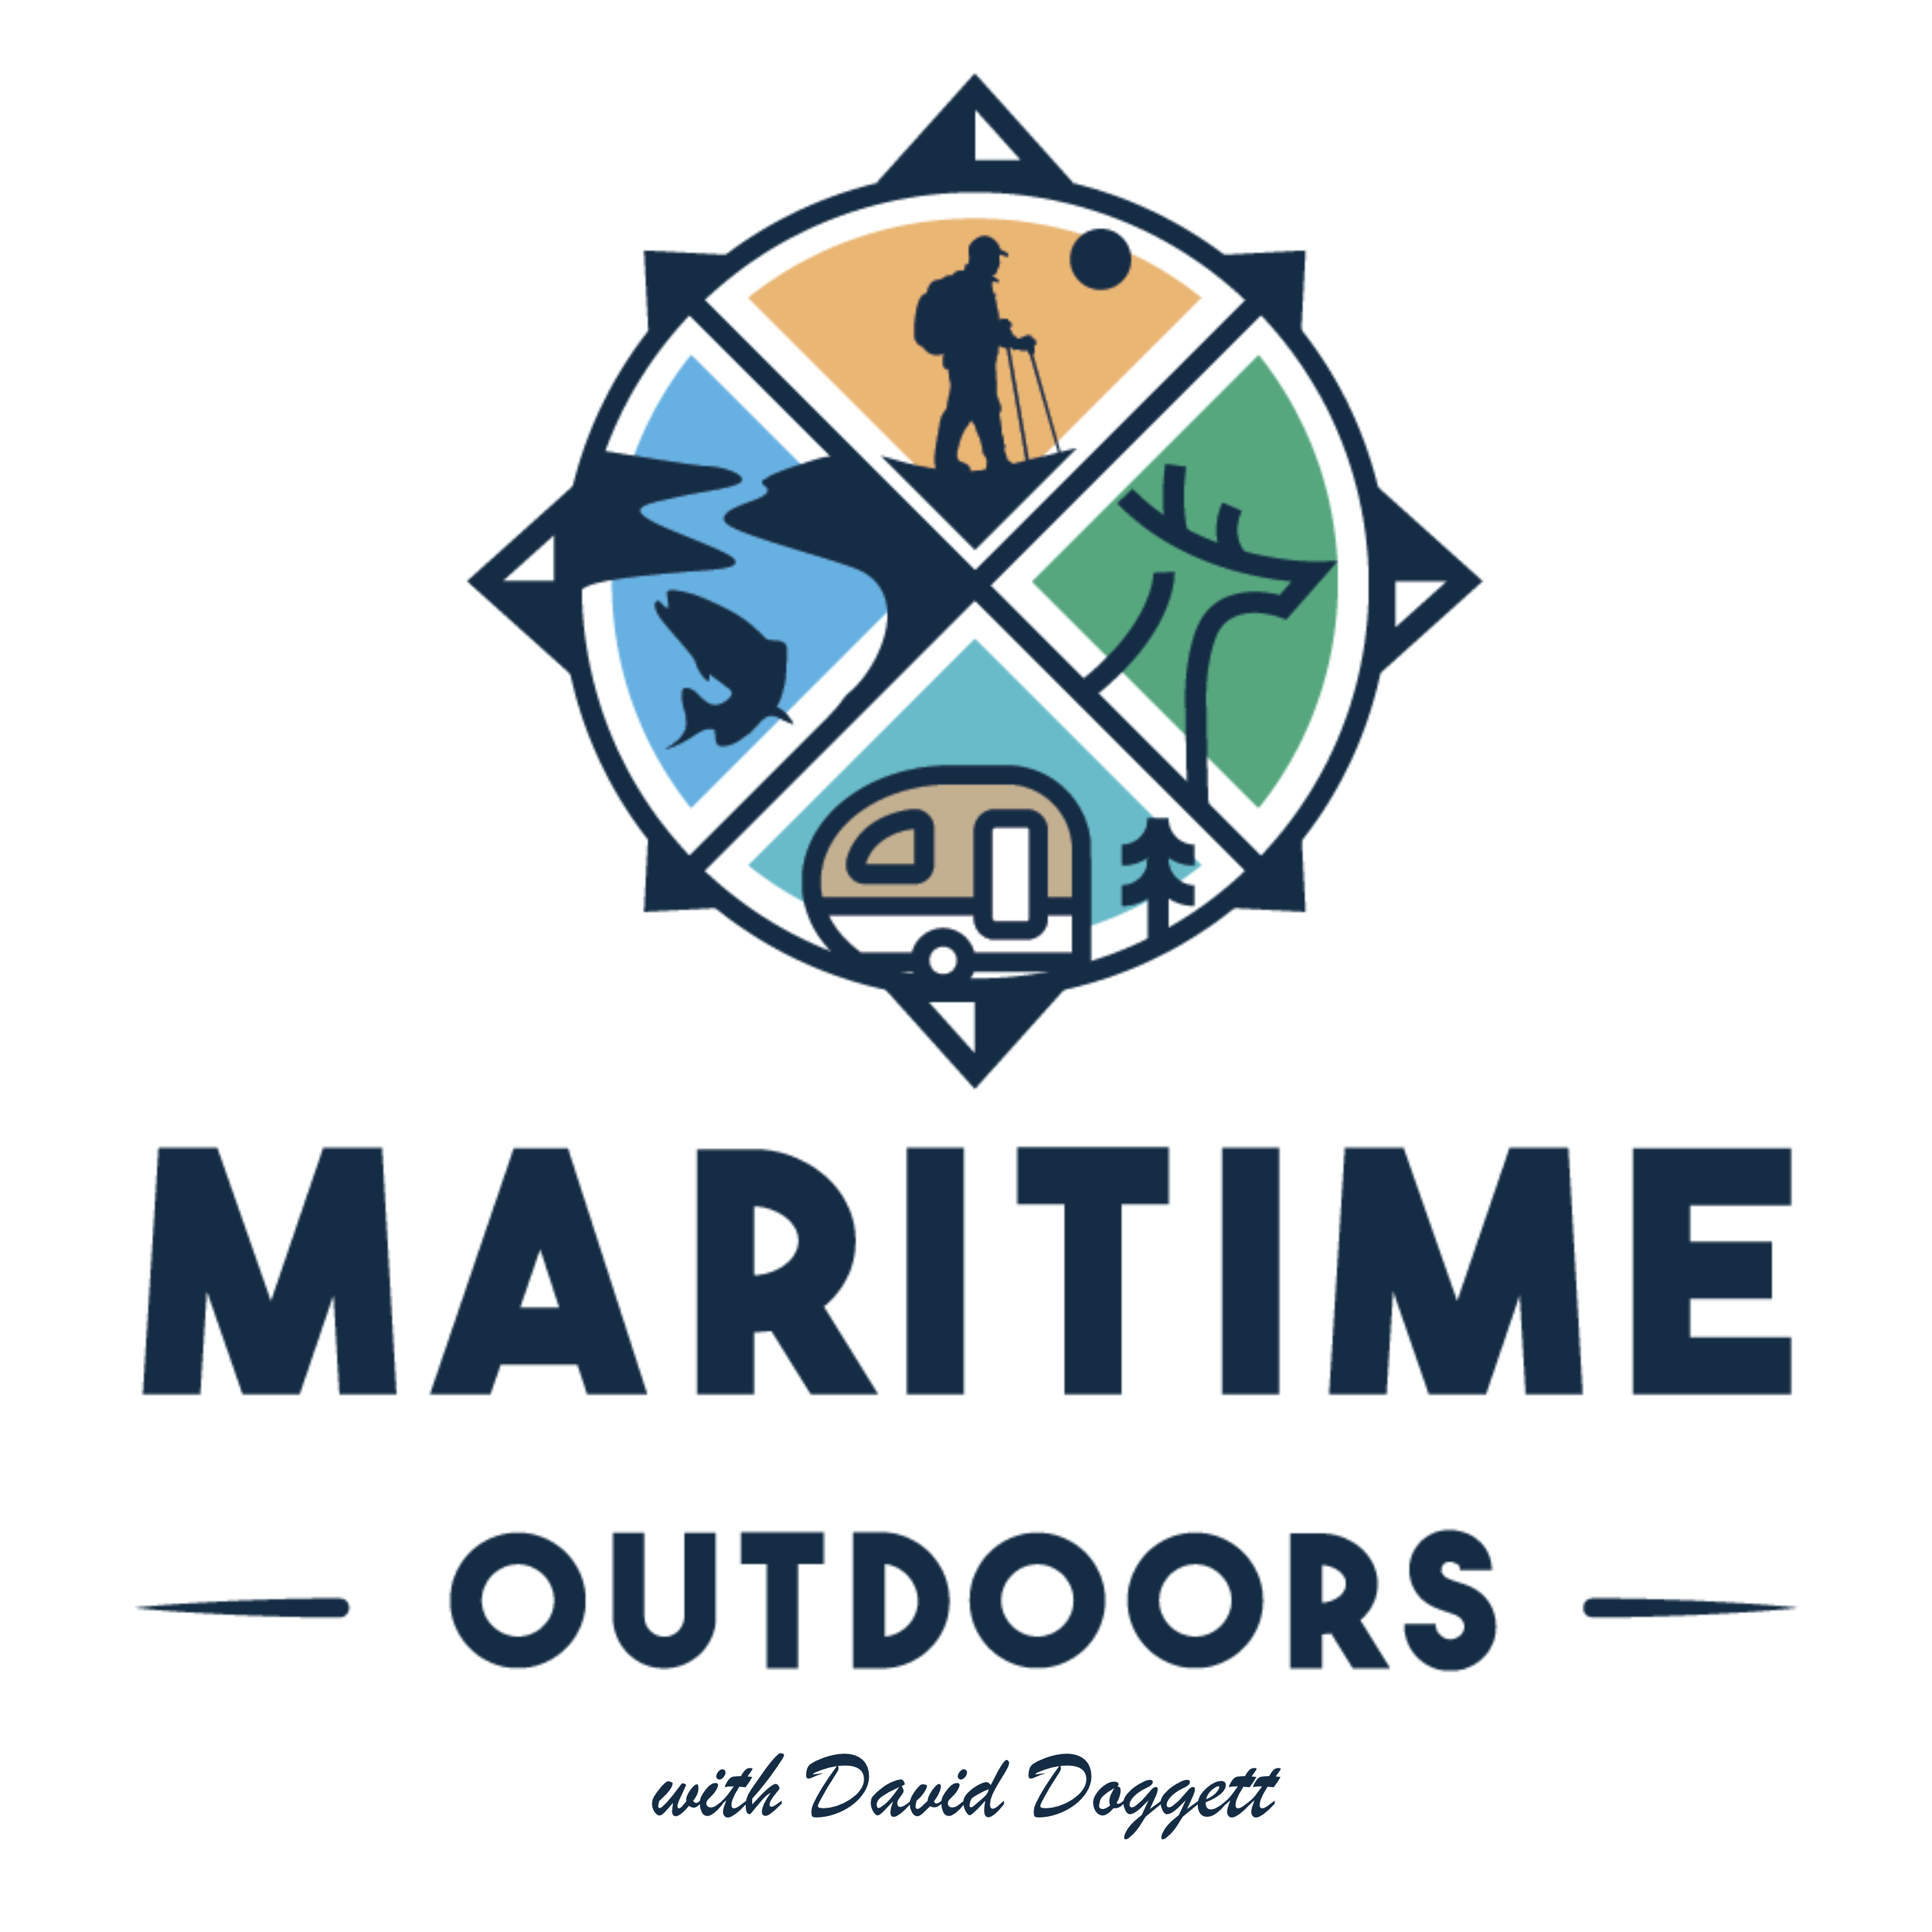 Maritime Outdoorsman - Podcast for Maritime outdoor enthusiasts